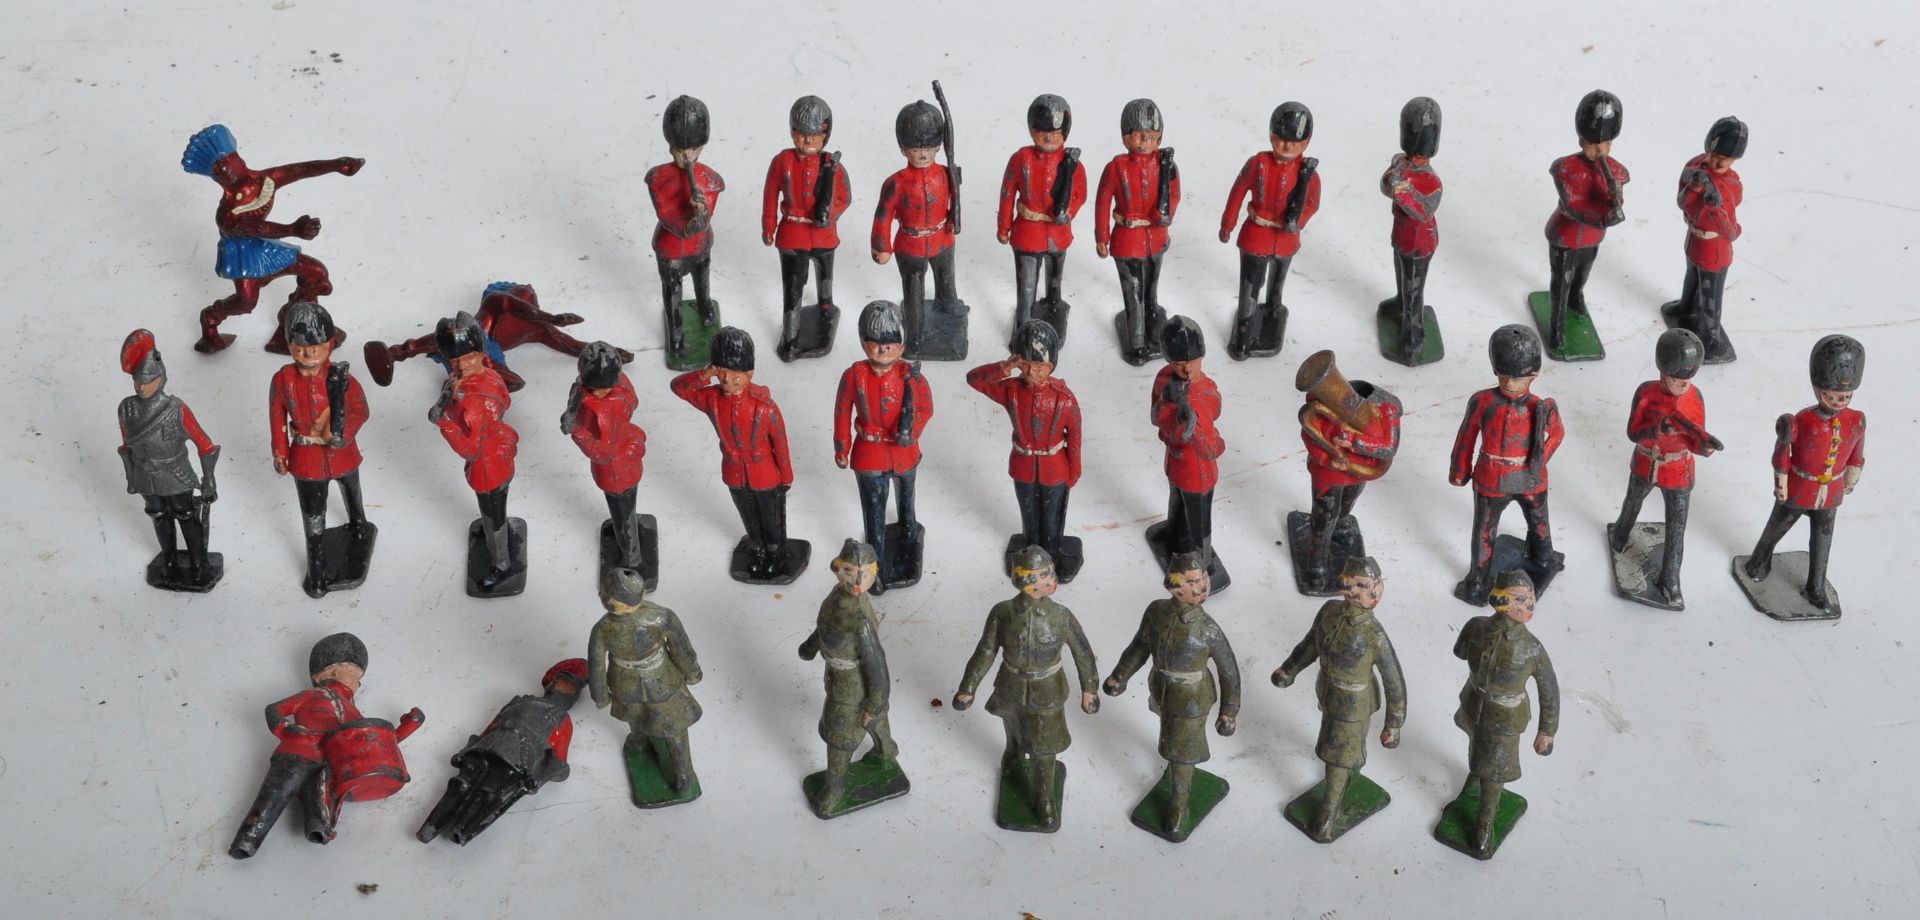 MID CENTURY HAND PAINTED LEAD SOLDIER FIGURES